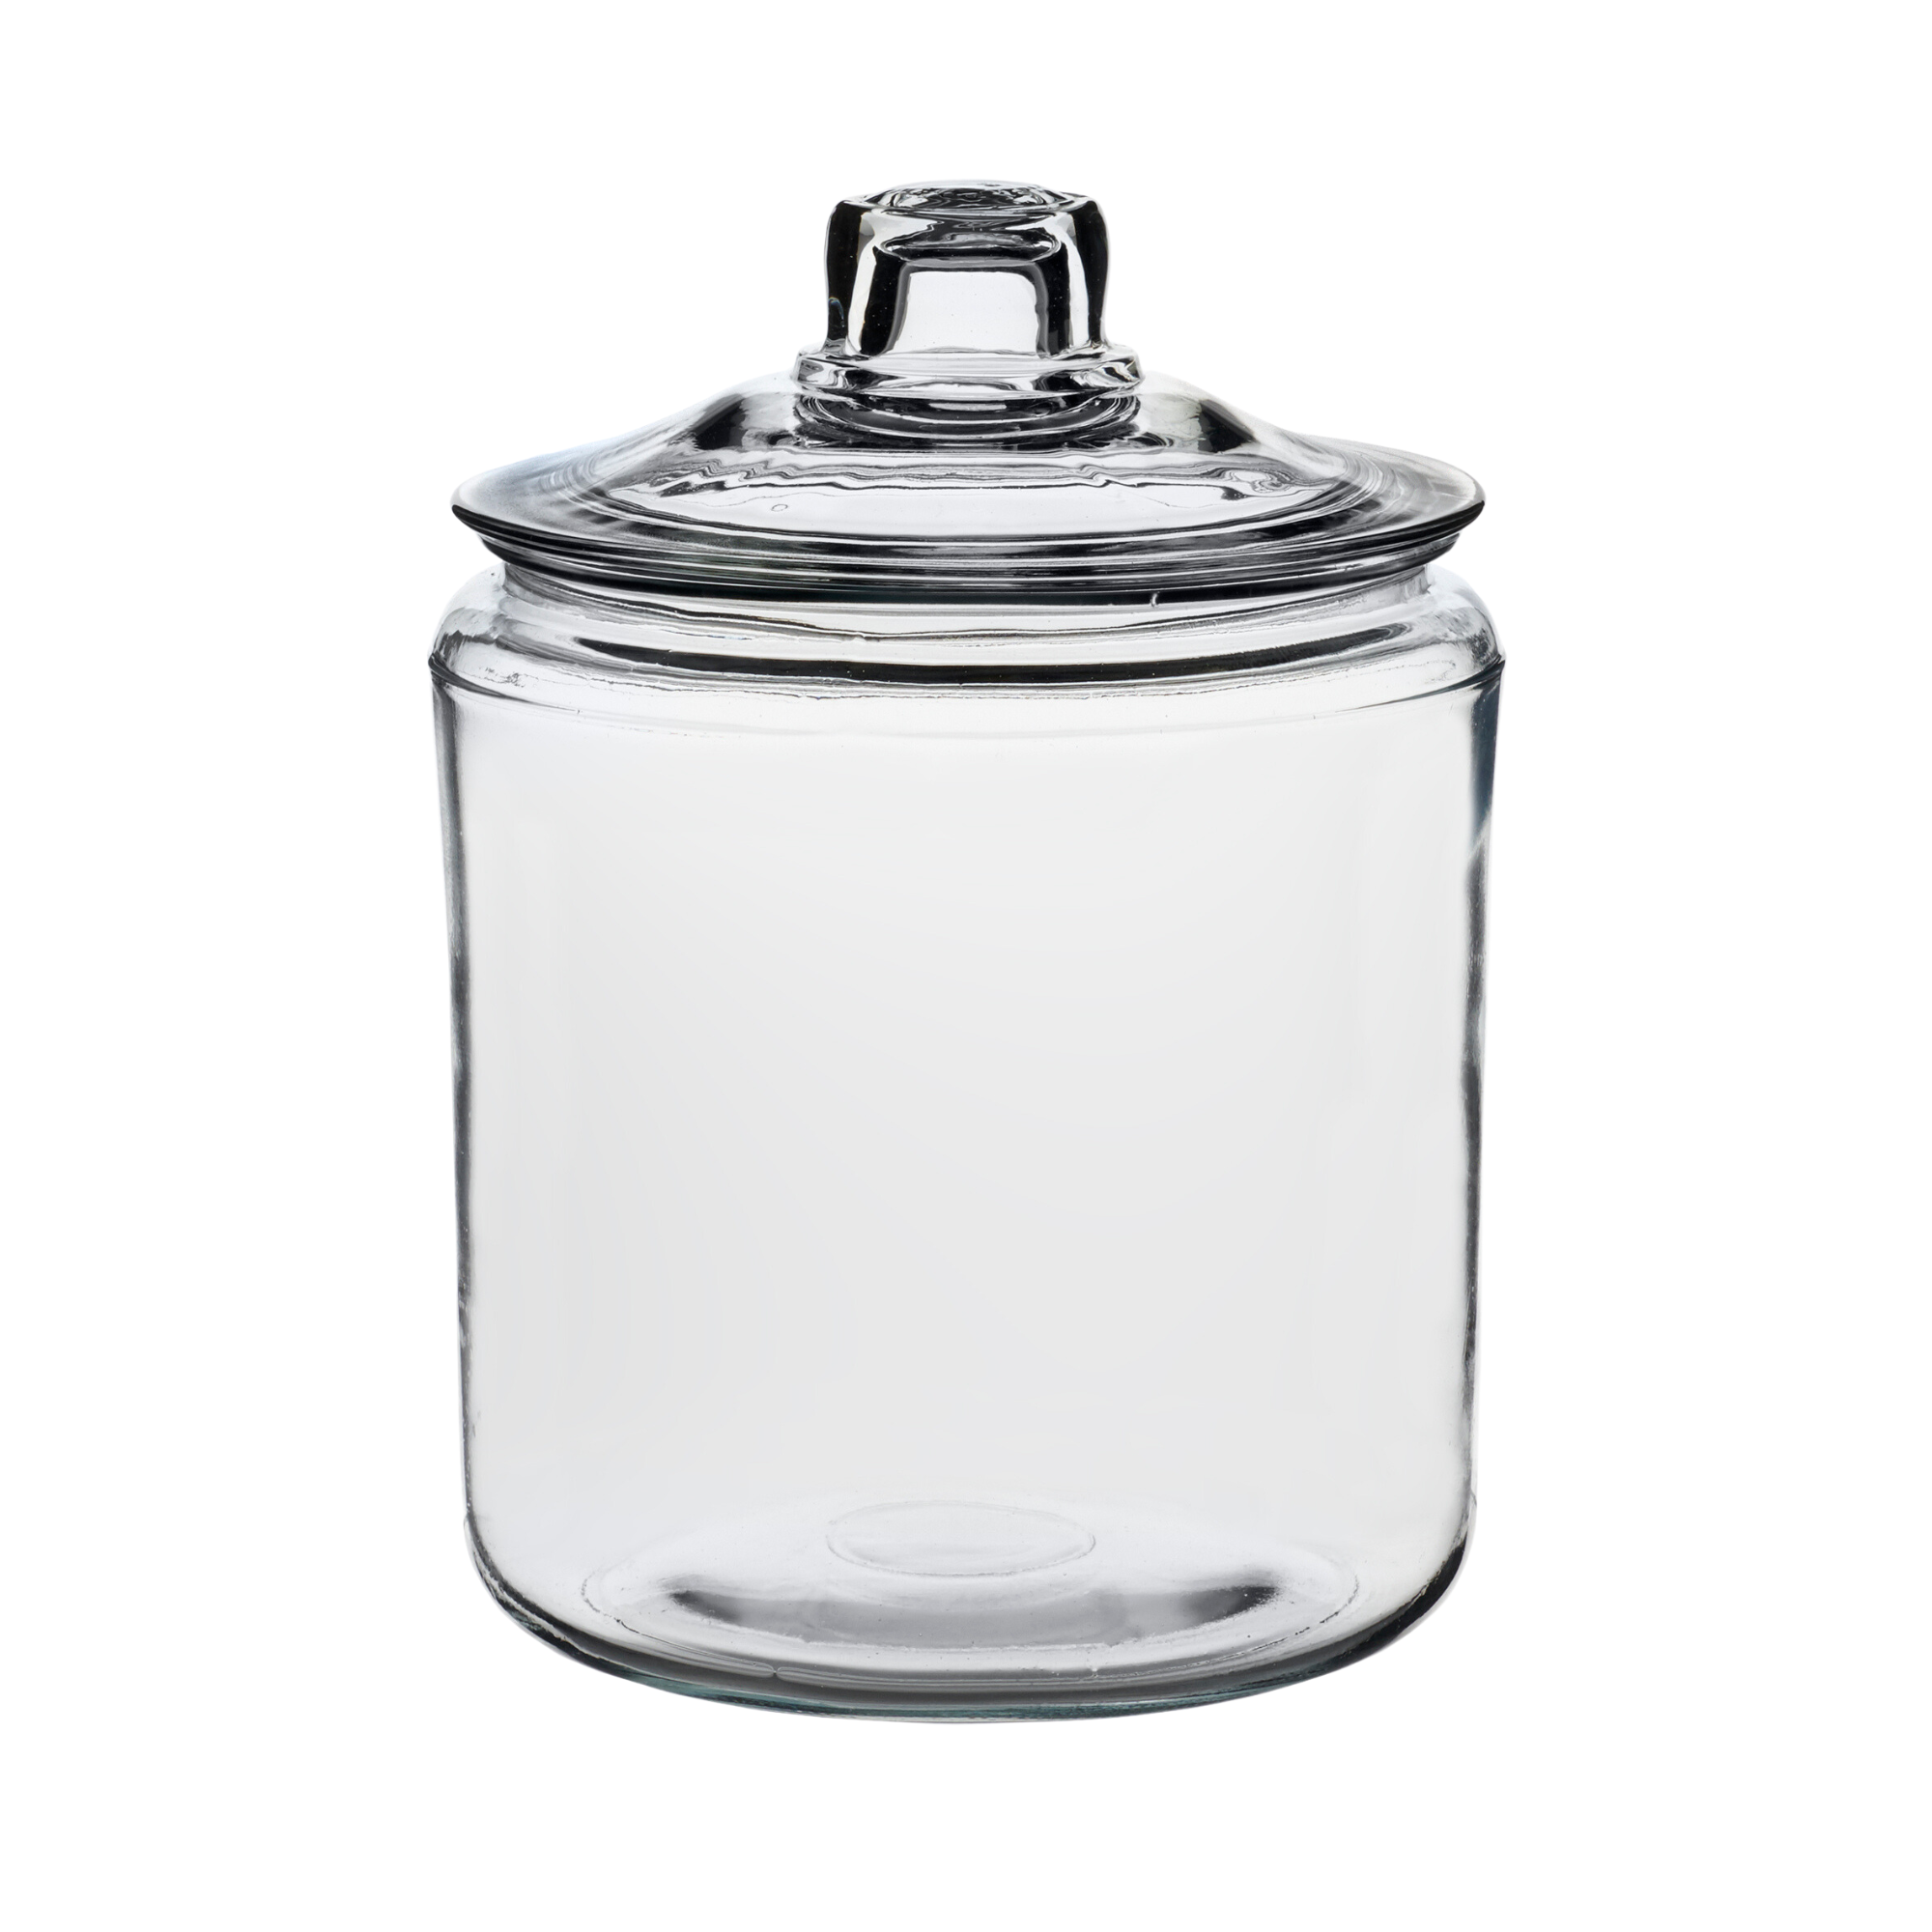 Anchor Hocking Heritage Hill Glass Jar with Lid, 1 Gallon - image 1 of 6